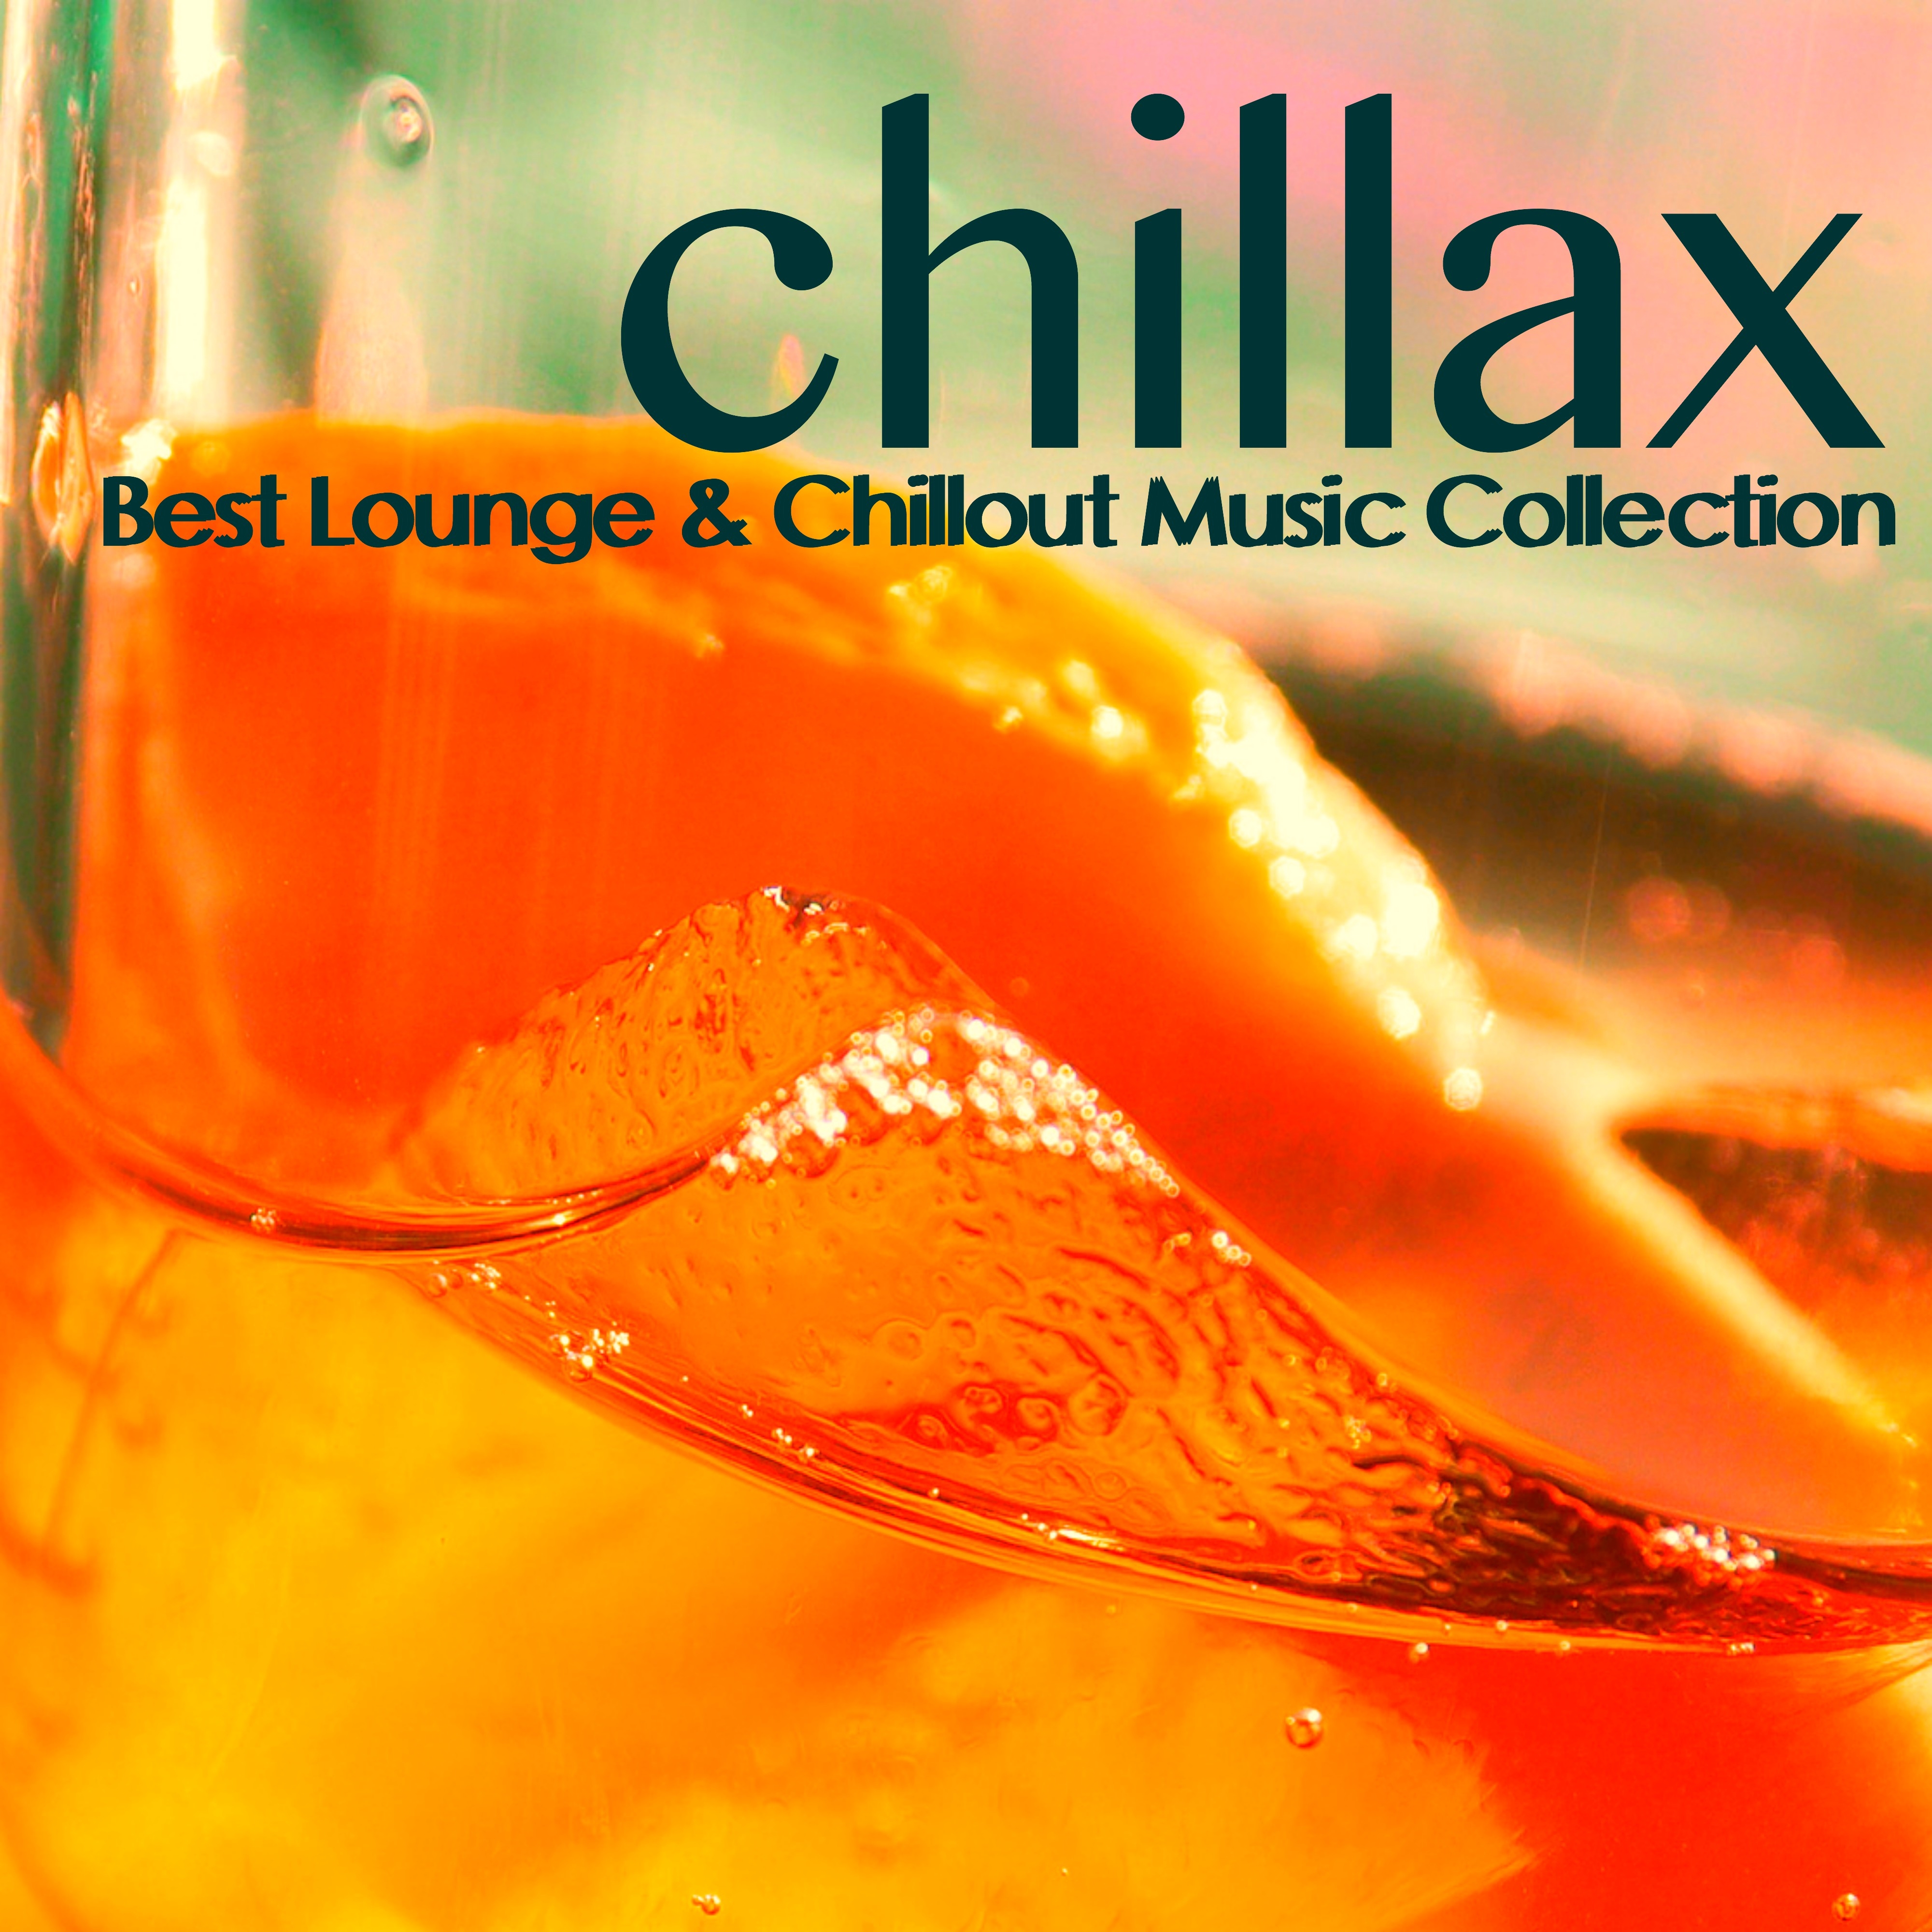 Chillax  Best Lounge  Chillout Music Collection